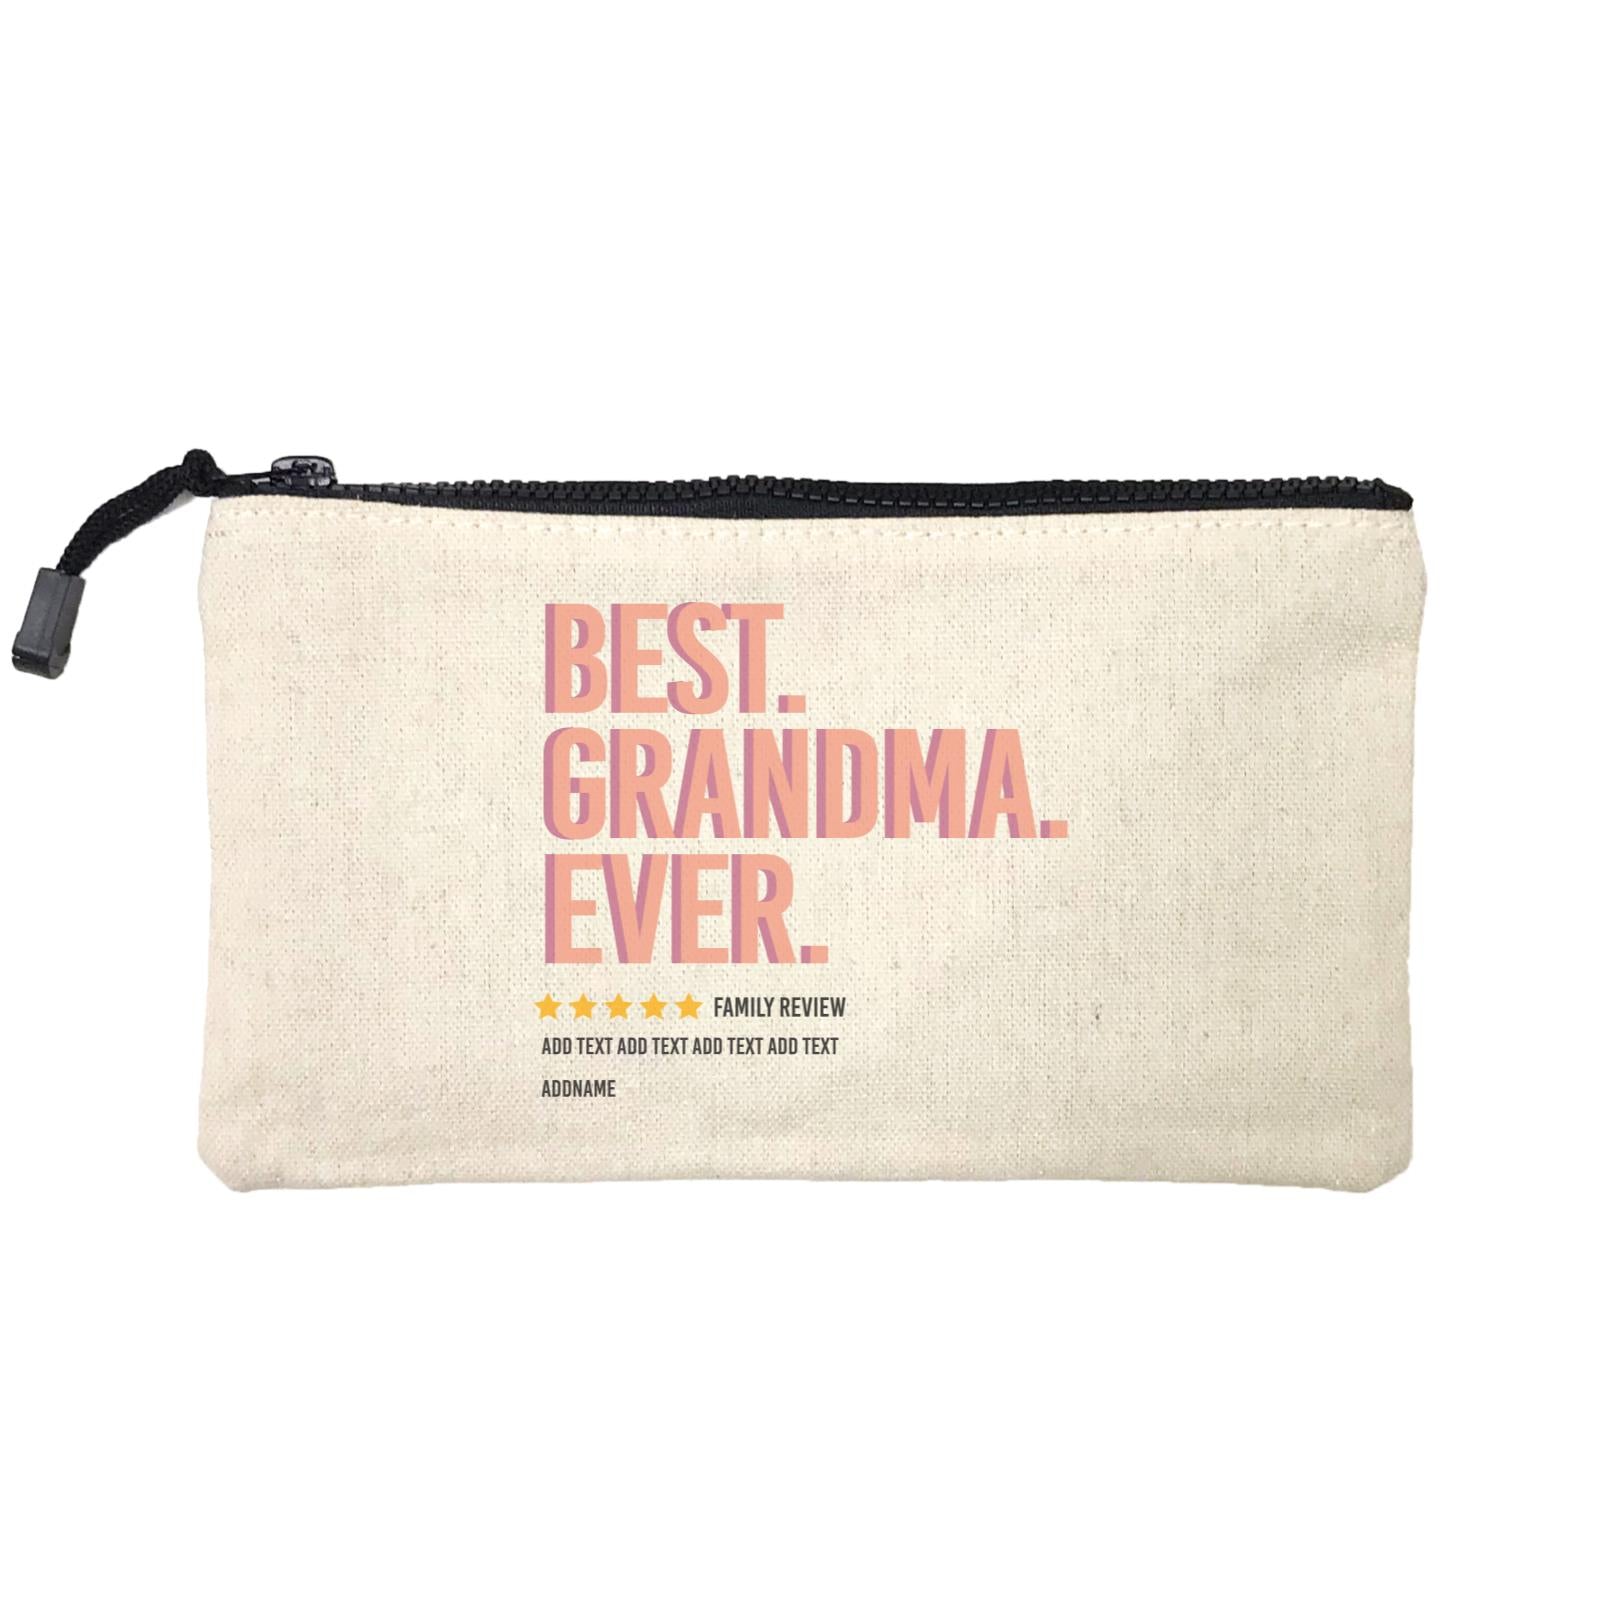 Awesome Mom 1 Best Grandma Ever Family Review Add Text And Addname Mini Accessories Stationery Pouch